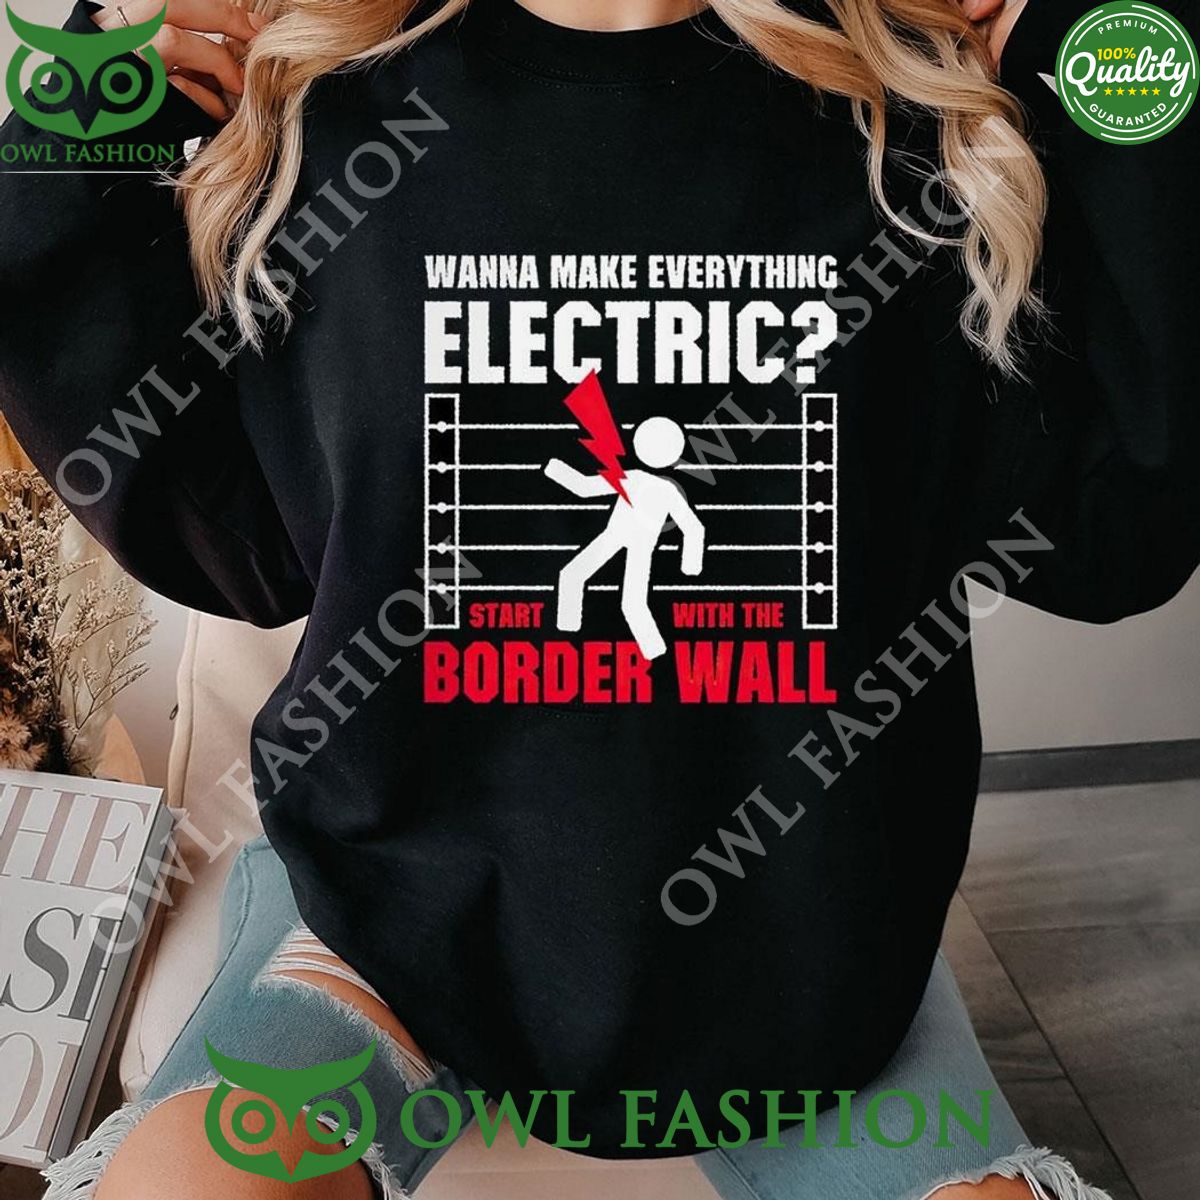 wanna make everything electric start with the border wall sweatshirt 1 nNFLe.jpg